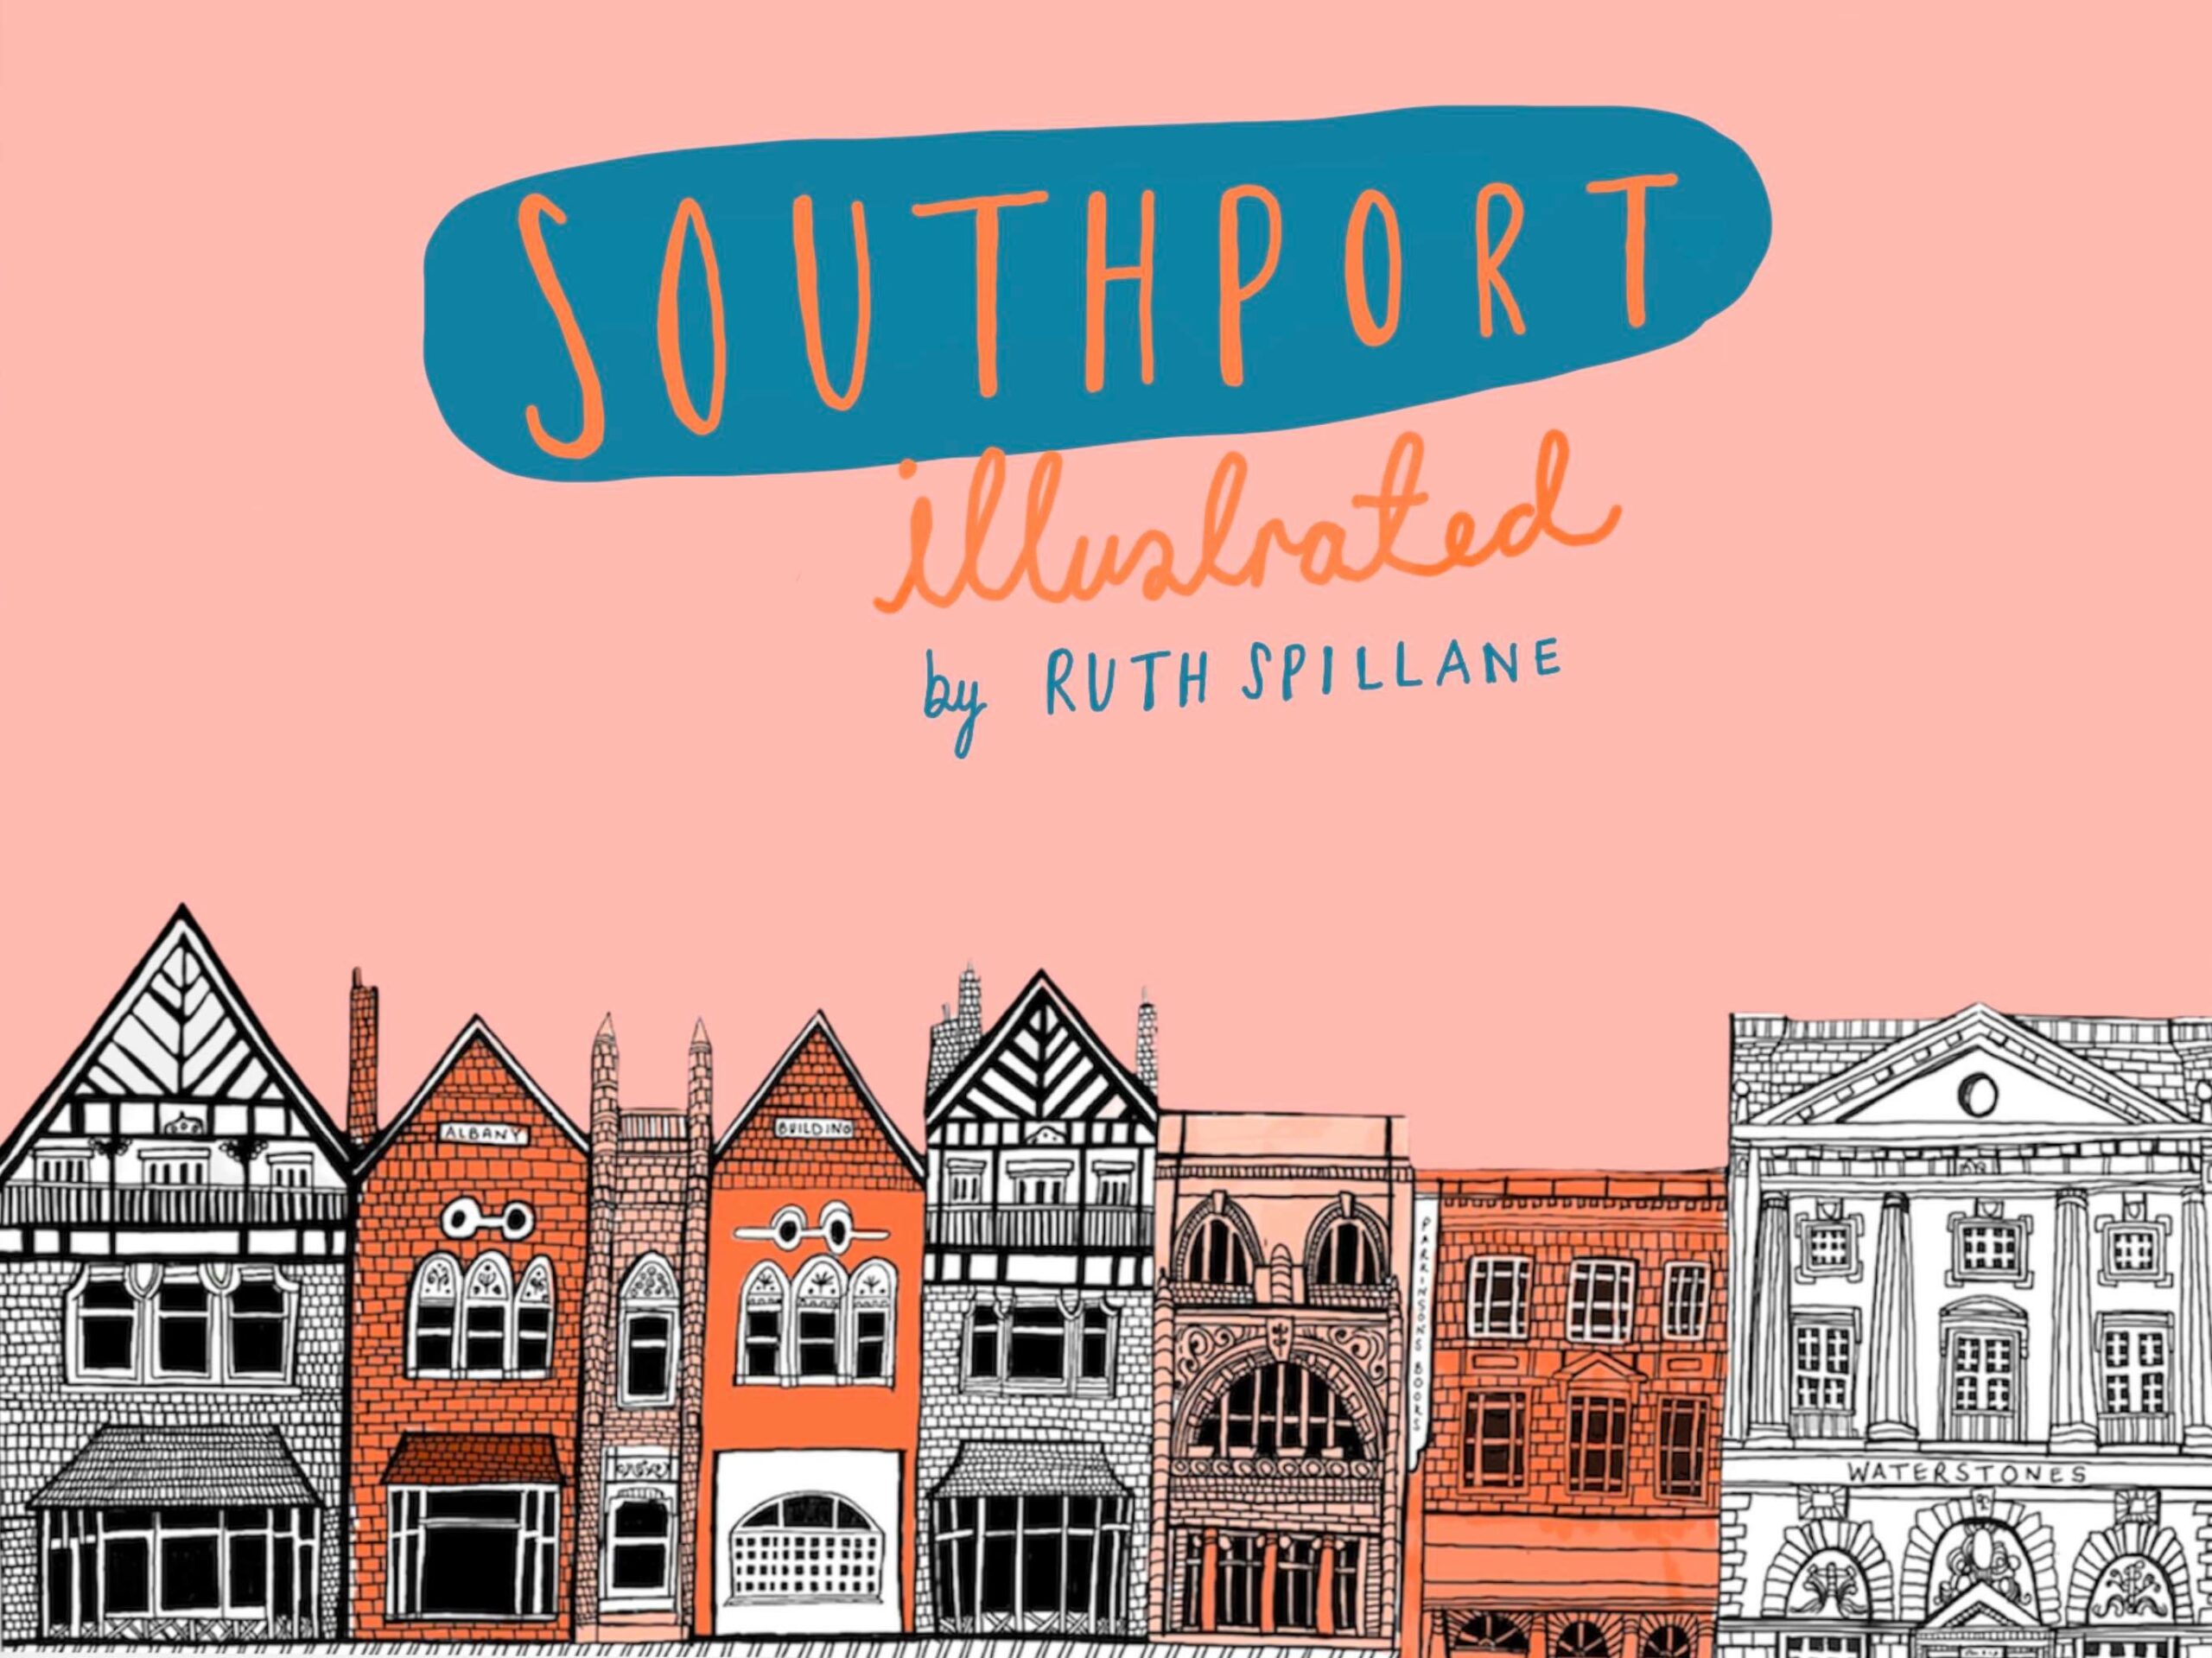 Artist Ruth Spillane is publishing a new book, Southport Illustrated.